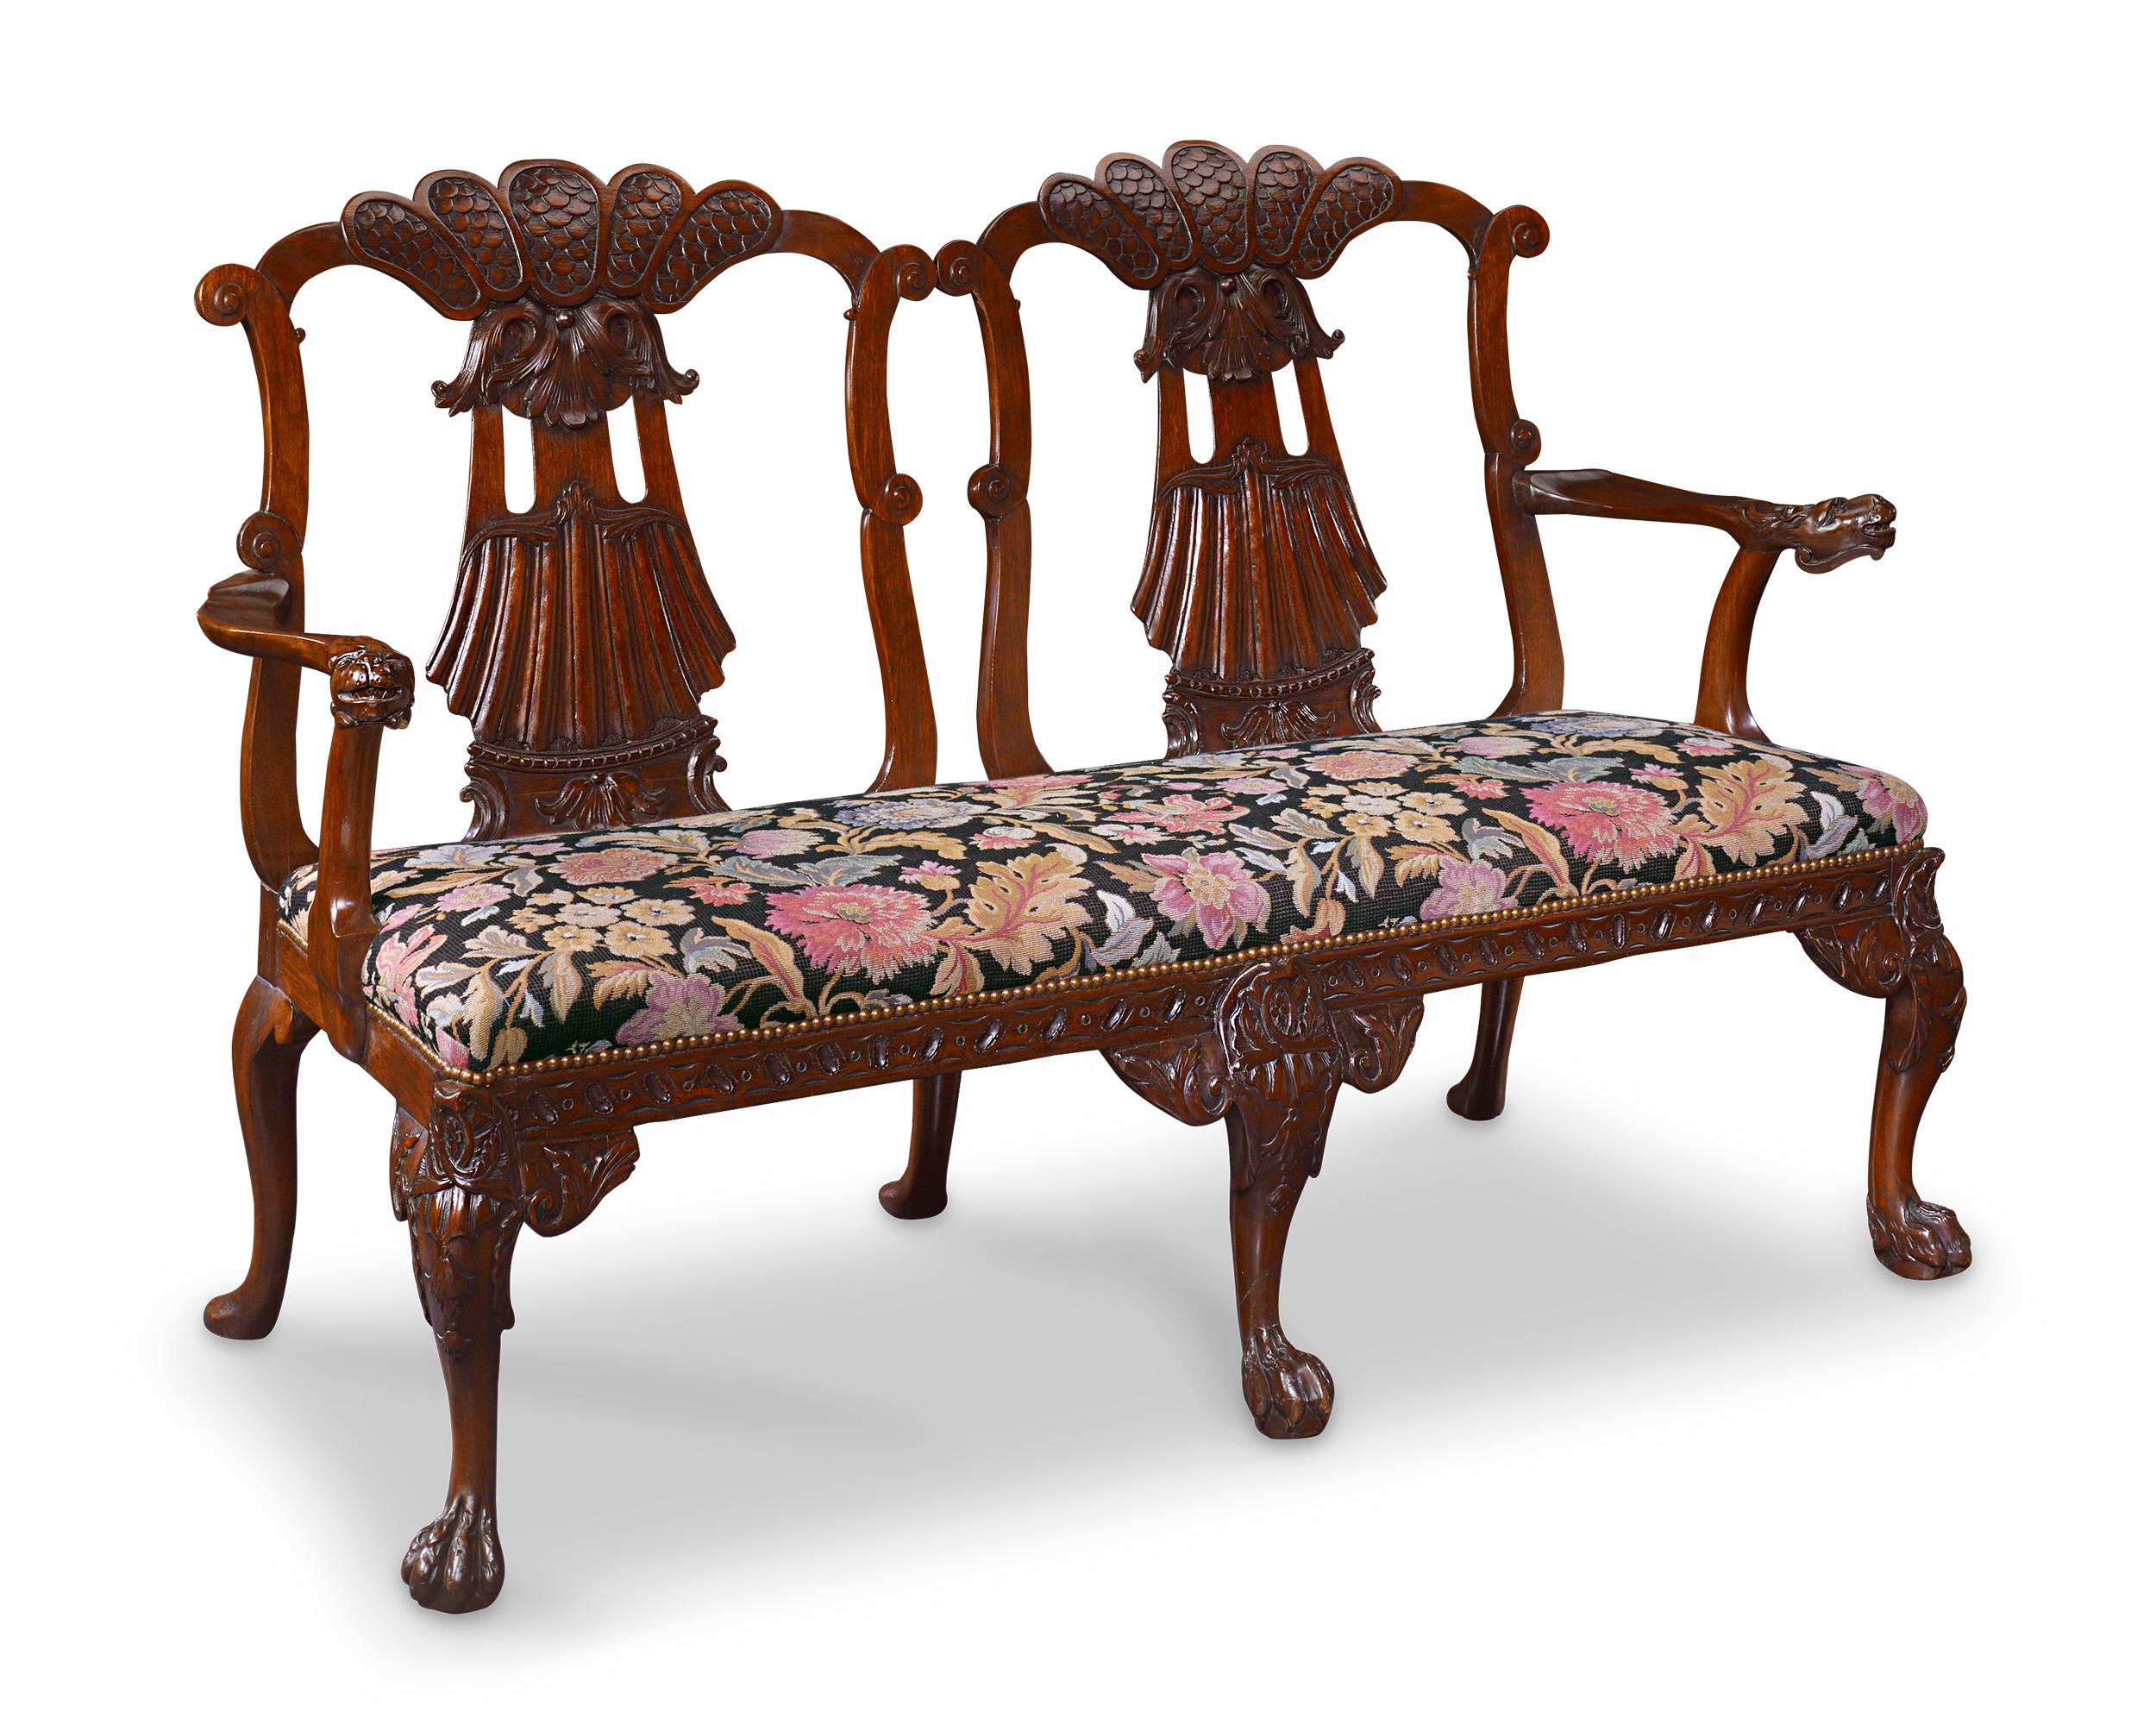 A magnificent mahogany double chair back settee crafted in the George II taste. From the scaled and scalloped back and zoomorphic armrests to the hairy ball-and-claw feet, the quality of the carving is deep and richly detailed. The seat is